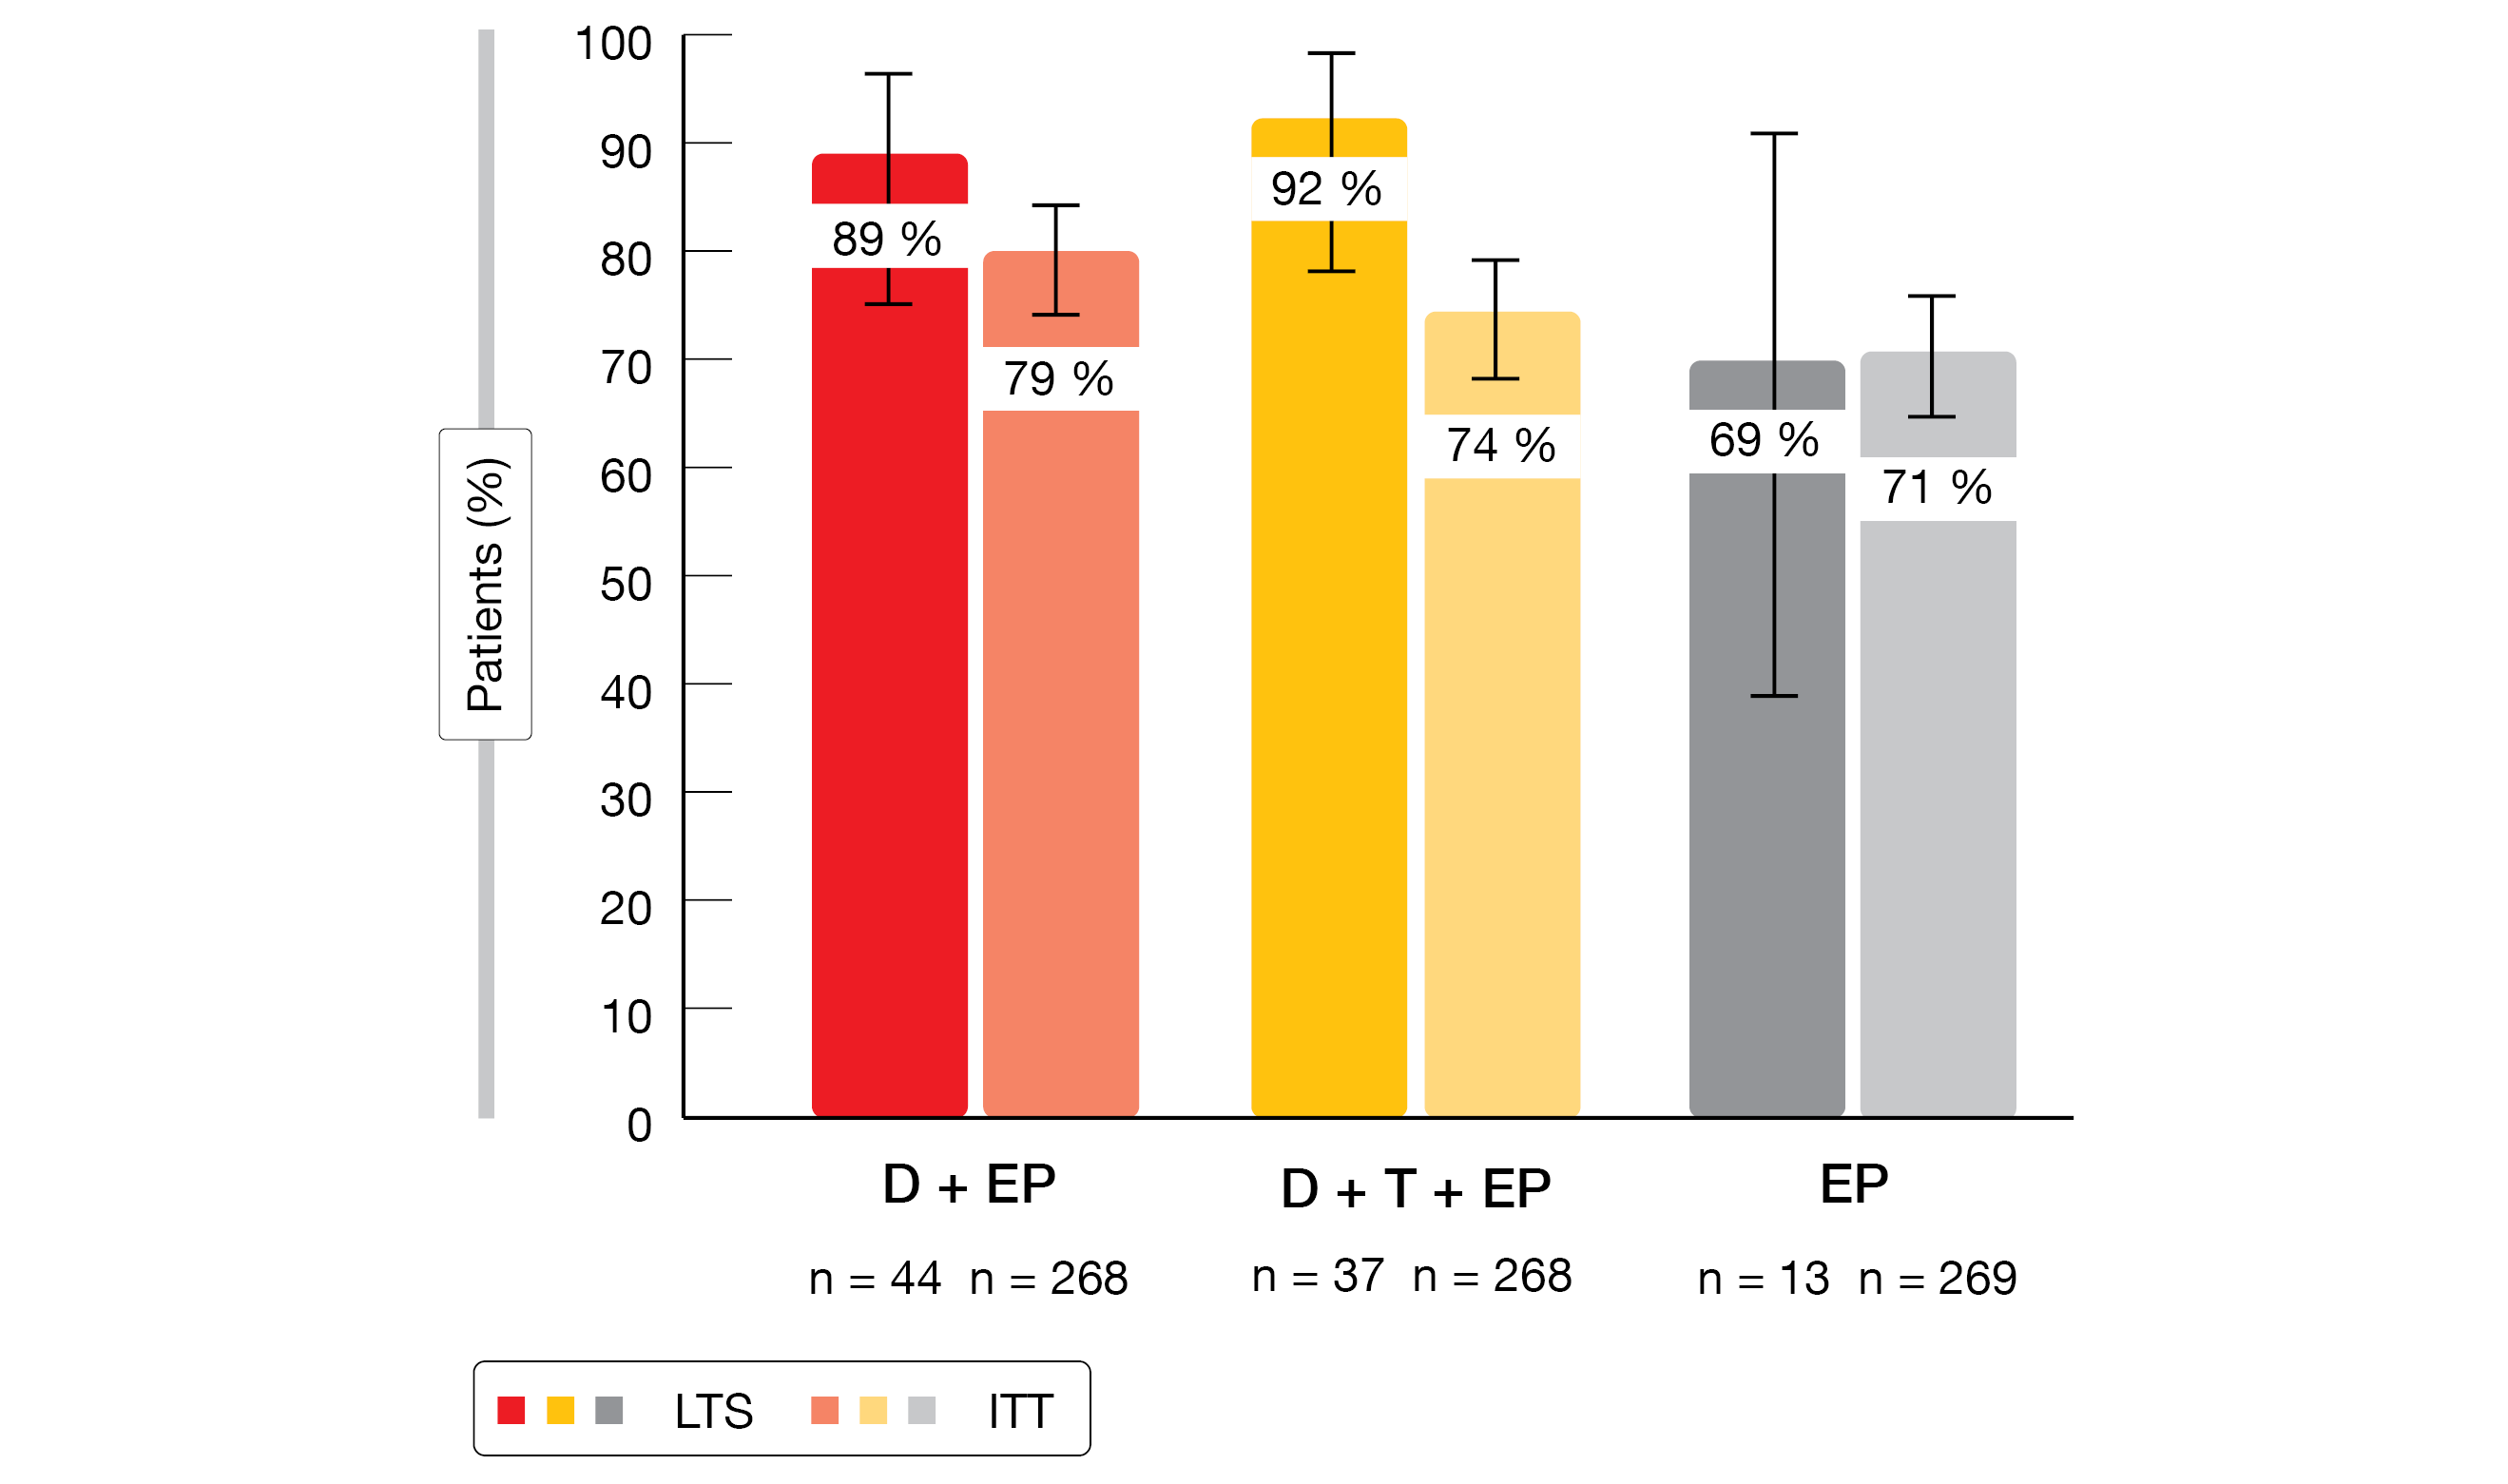 Figure: Objective response rates in long-term survivors (LTS) and the ITT population with durvalumab plus EP (D+EP), durvalumab/tremelimumab plus EP (D+T+EP), and EP alone